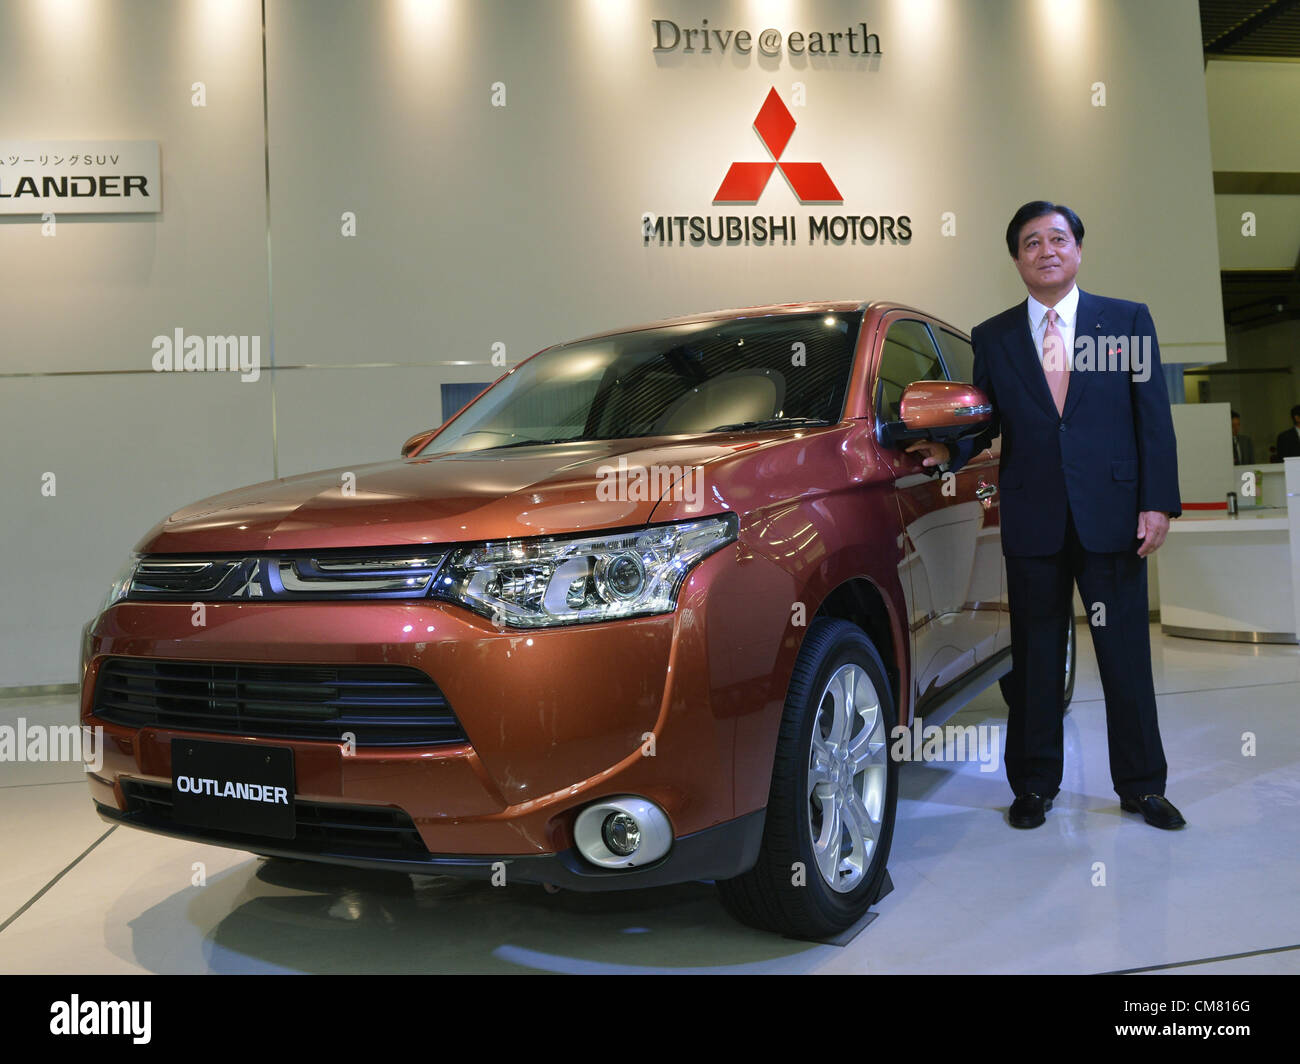 October 25, 2012, Tokyo, Japan - President Osamu Mashiko of Mitsubishi Motors poses with the all new SUV Outlander during a launch at its head office in Tokyo on Thursday, October 25, 2012. The new Outlander comes in a 2.4-liter four-wheel-drive model and a 2.0-liter two-wheel-drive version. (Photo by Natsuki Sakai/AFLO) AYF -mis- Stock Photo